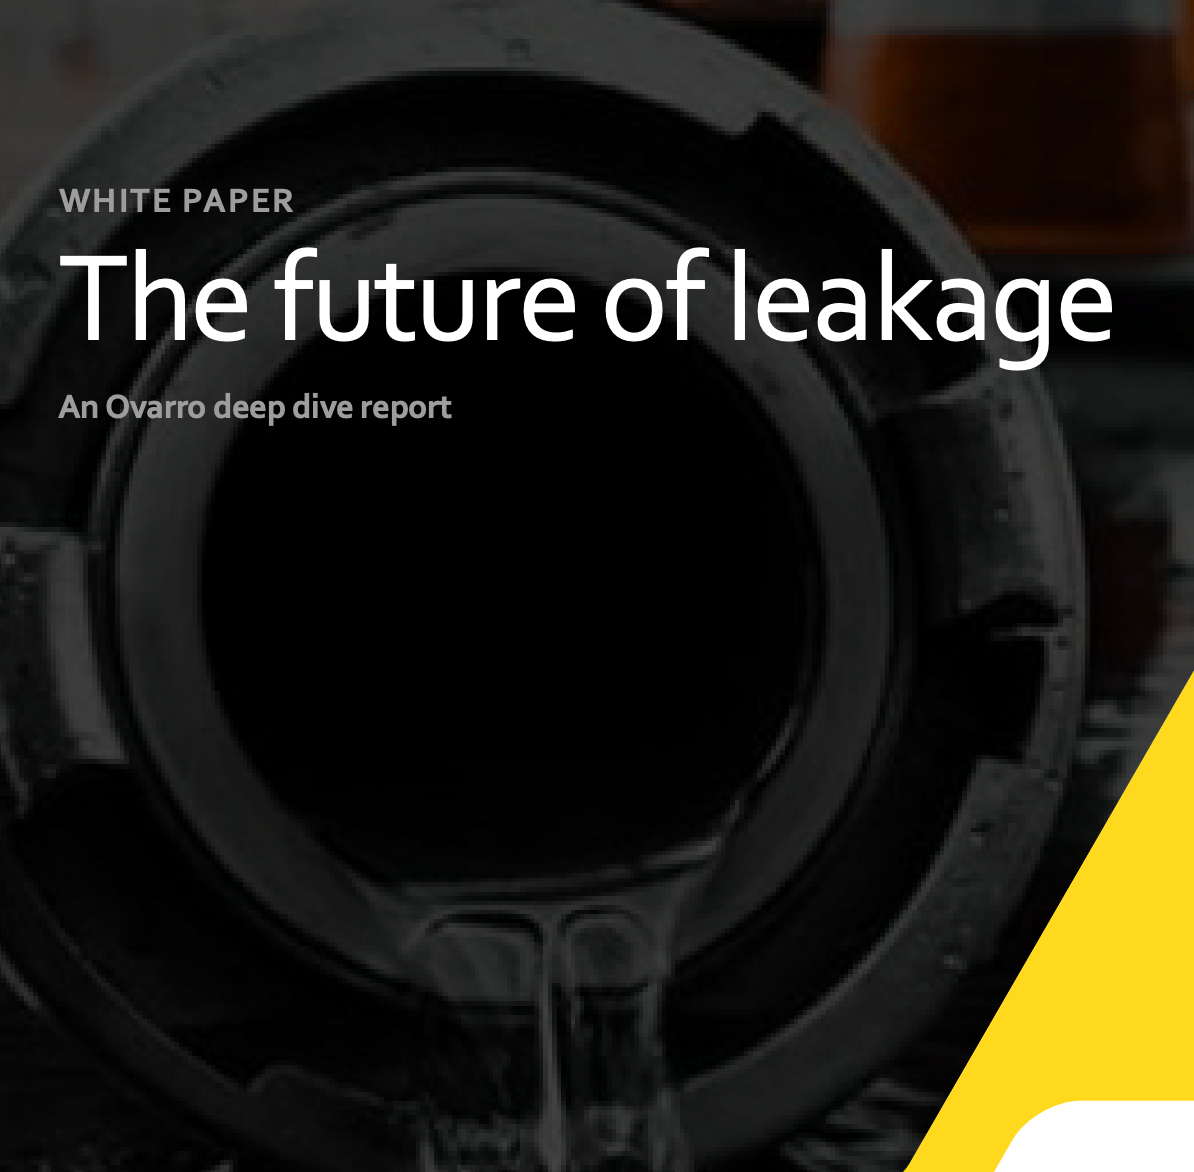 Report shows how leakage technology is advancing